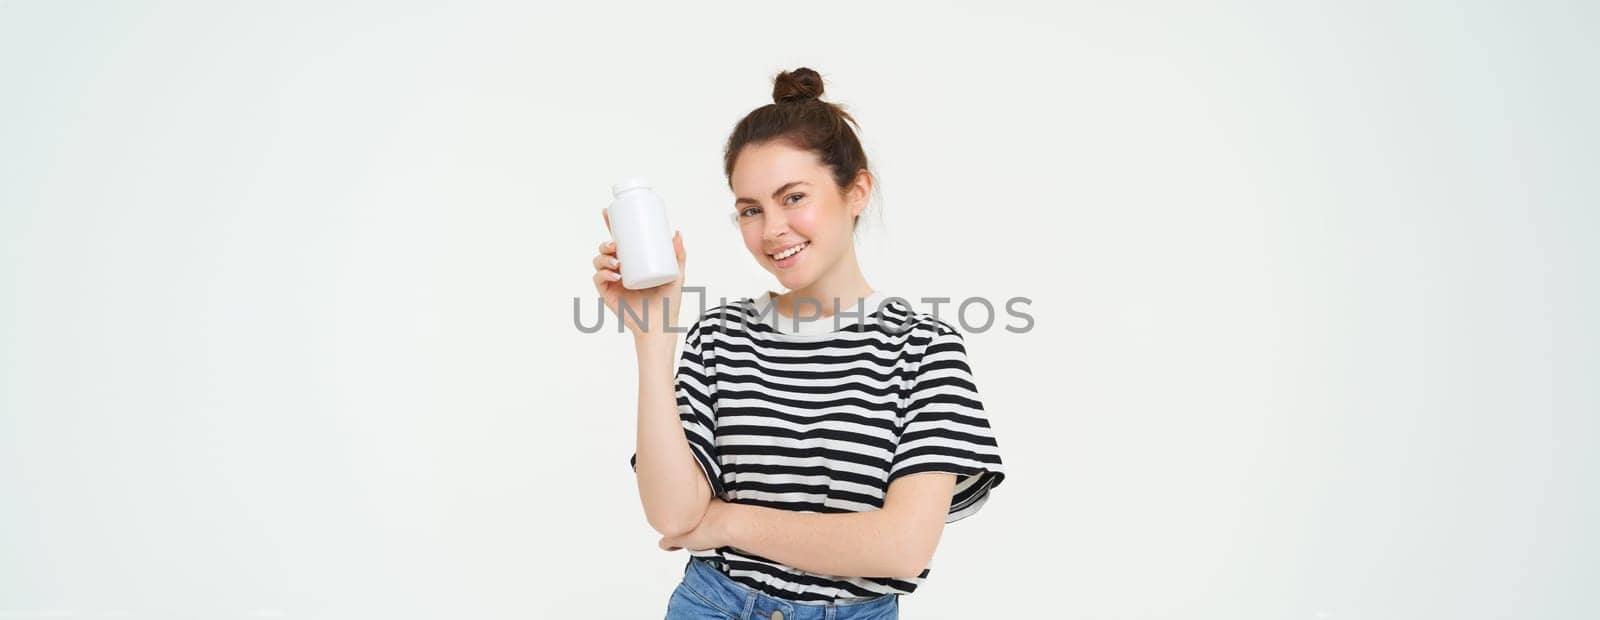 Young smiling woman recommends vitamins, shows bottle with dietary supplements, looks healthy and happy, isolated over white background.